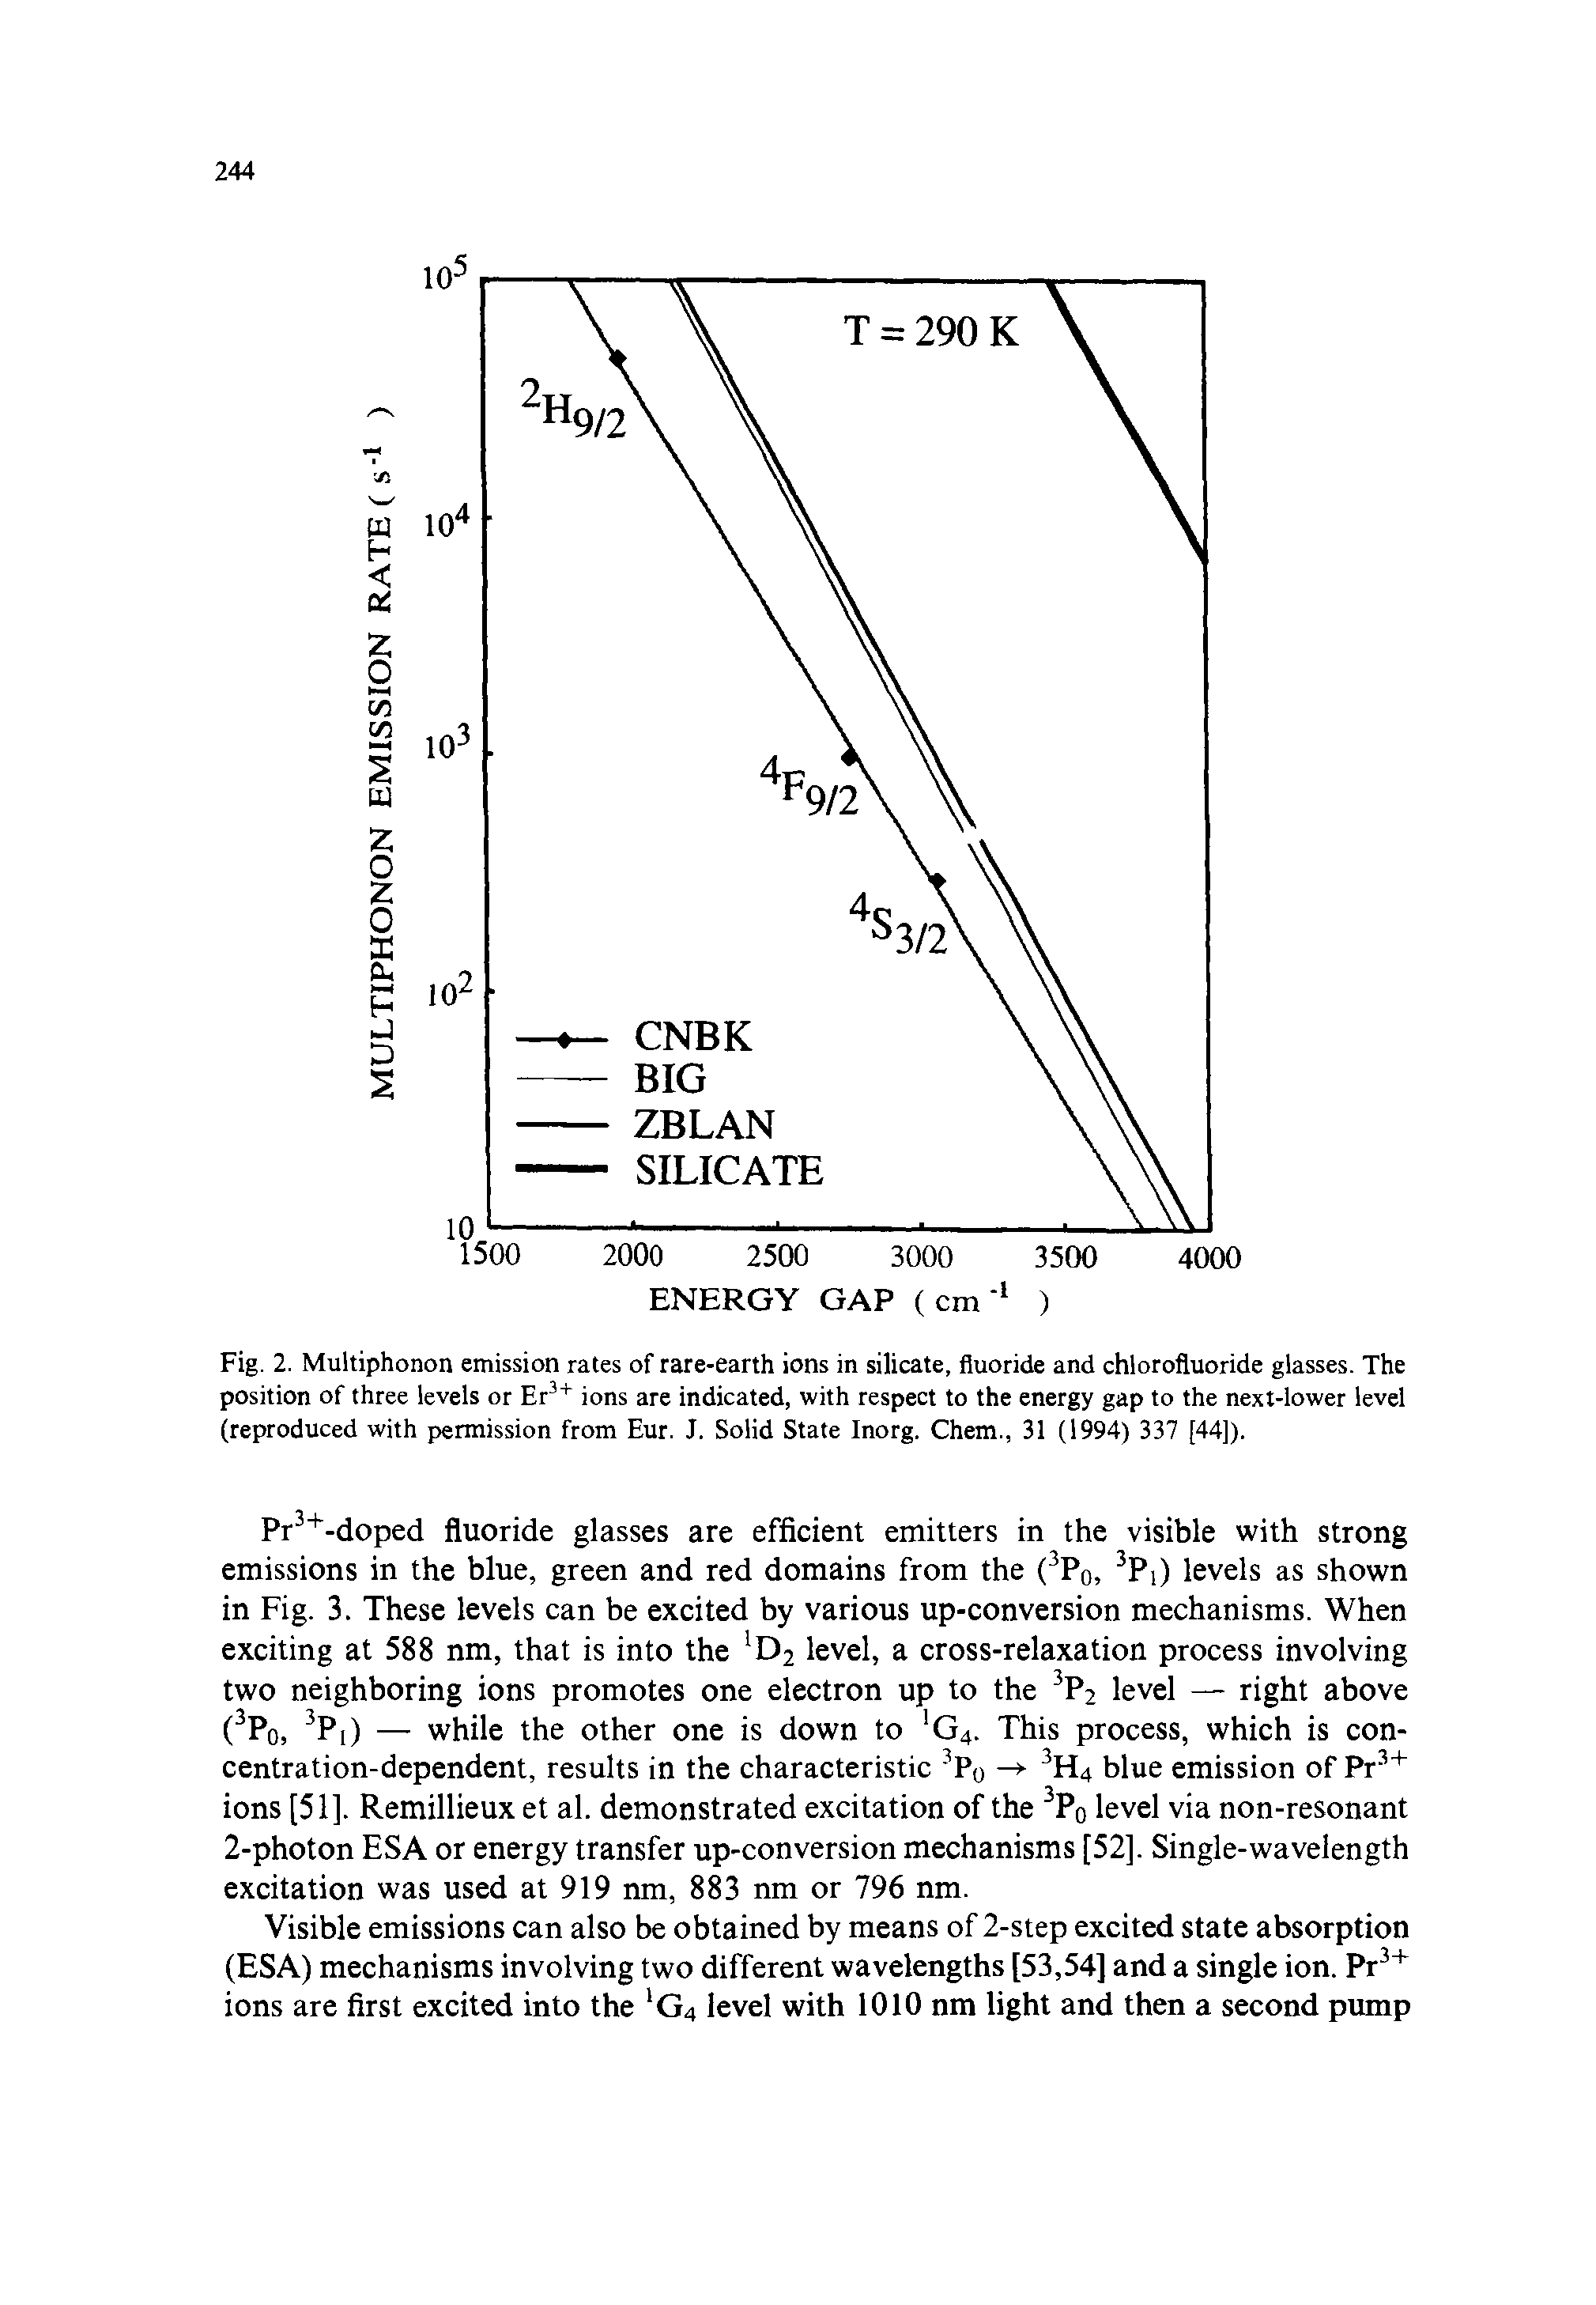 Fig. 2. Multiphonon emission rates of rare-earth ions in silicate, fluoride and chlorofluoride glasses. The position of three levels or Er3+ ions are indicated, with respect to the energy gap to the next-lower level (reproduced with permission from Eur. J. Solid State Inorg. Chem., 31 (1994) 337 [44]).